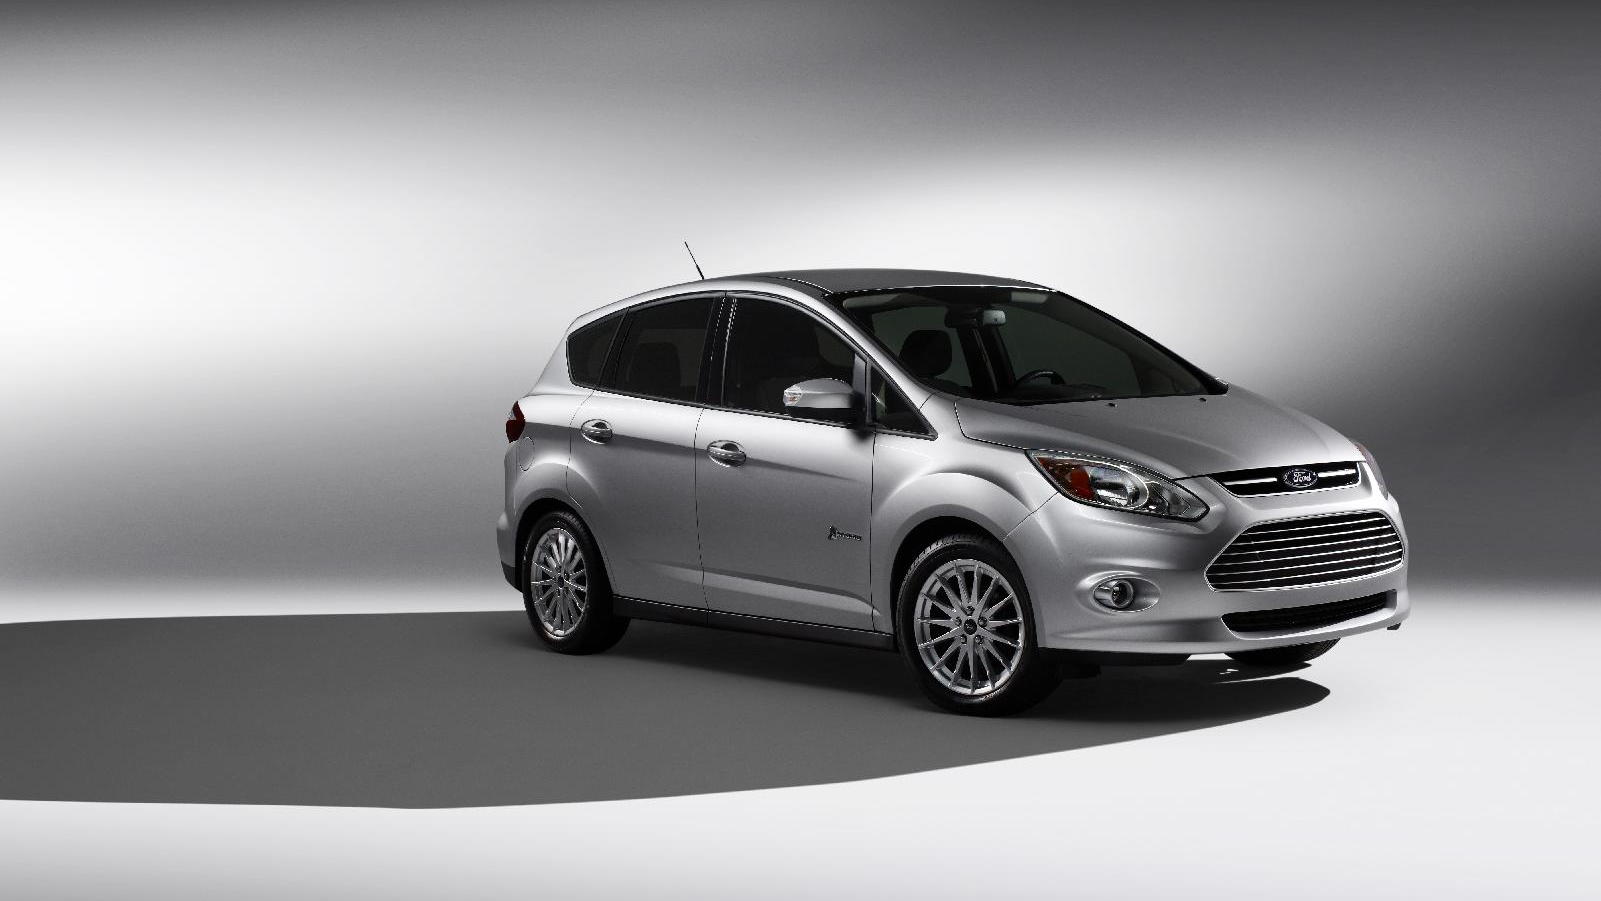 Ford C-Max Hybrid, first revealed at the 2011 Detroit Auto Show